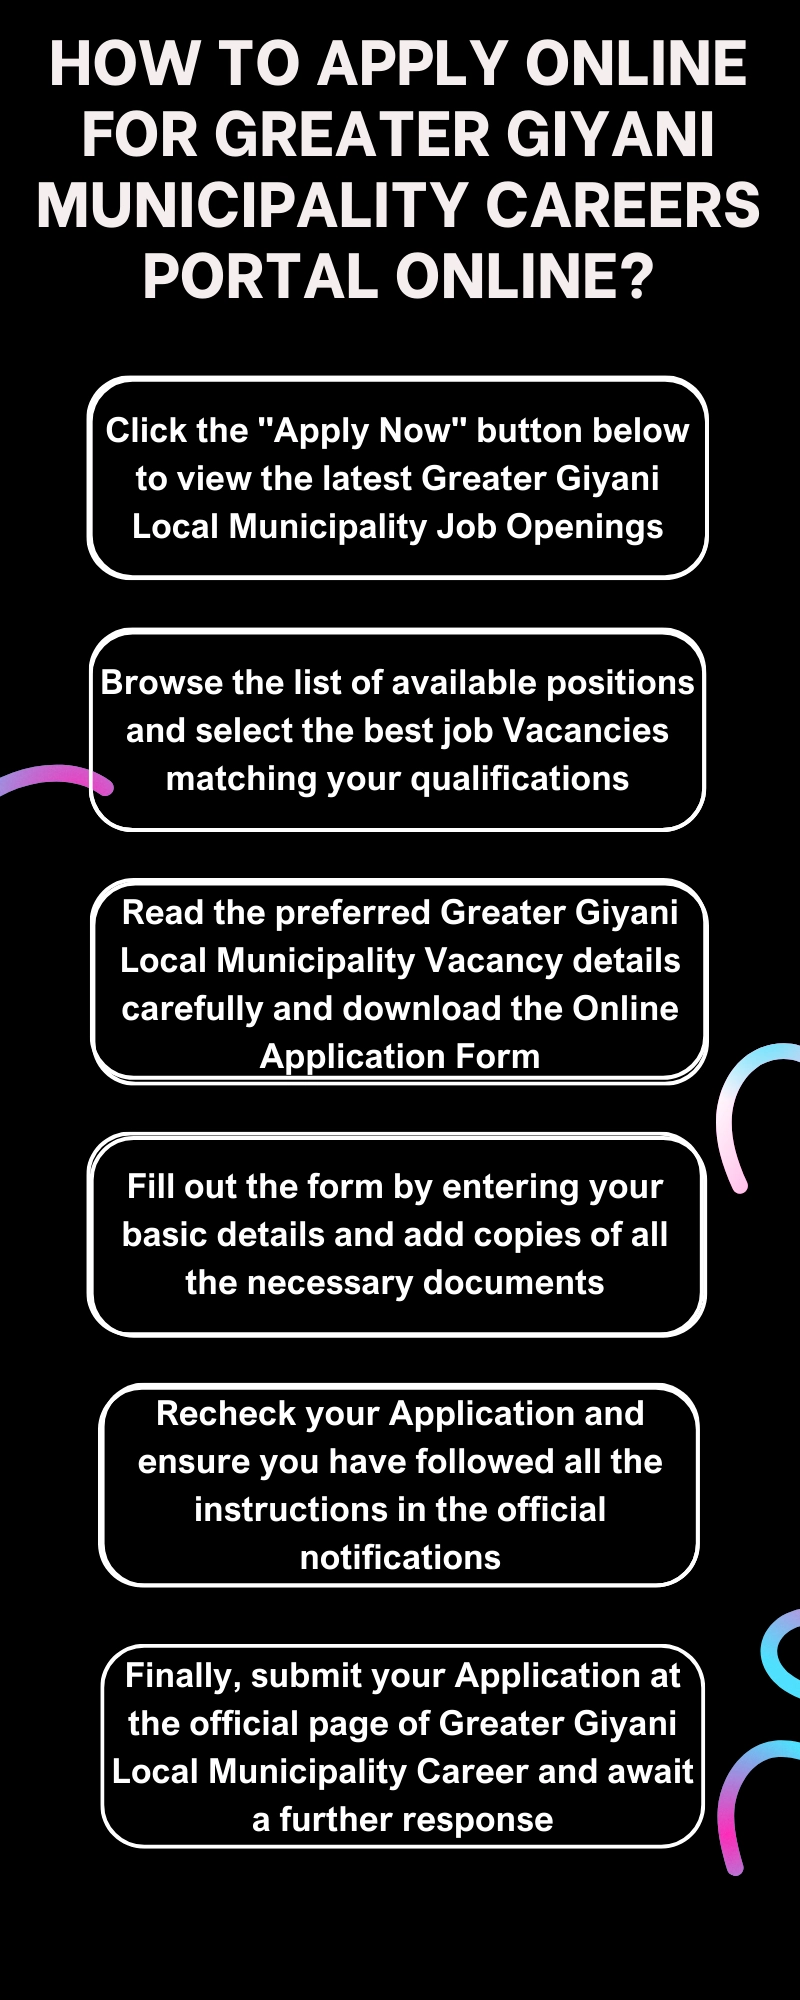 How to Apply online for Greater Giyani Municipality Careers Portal Online_